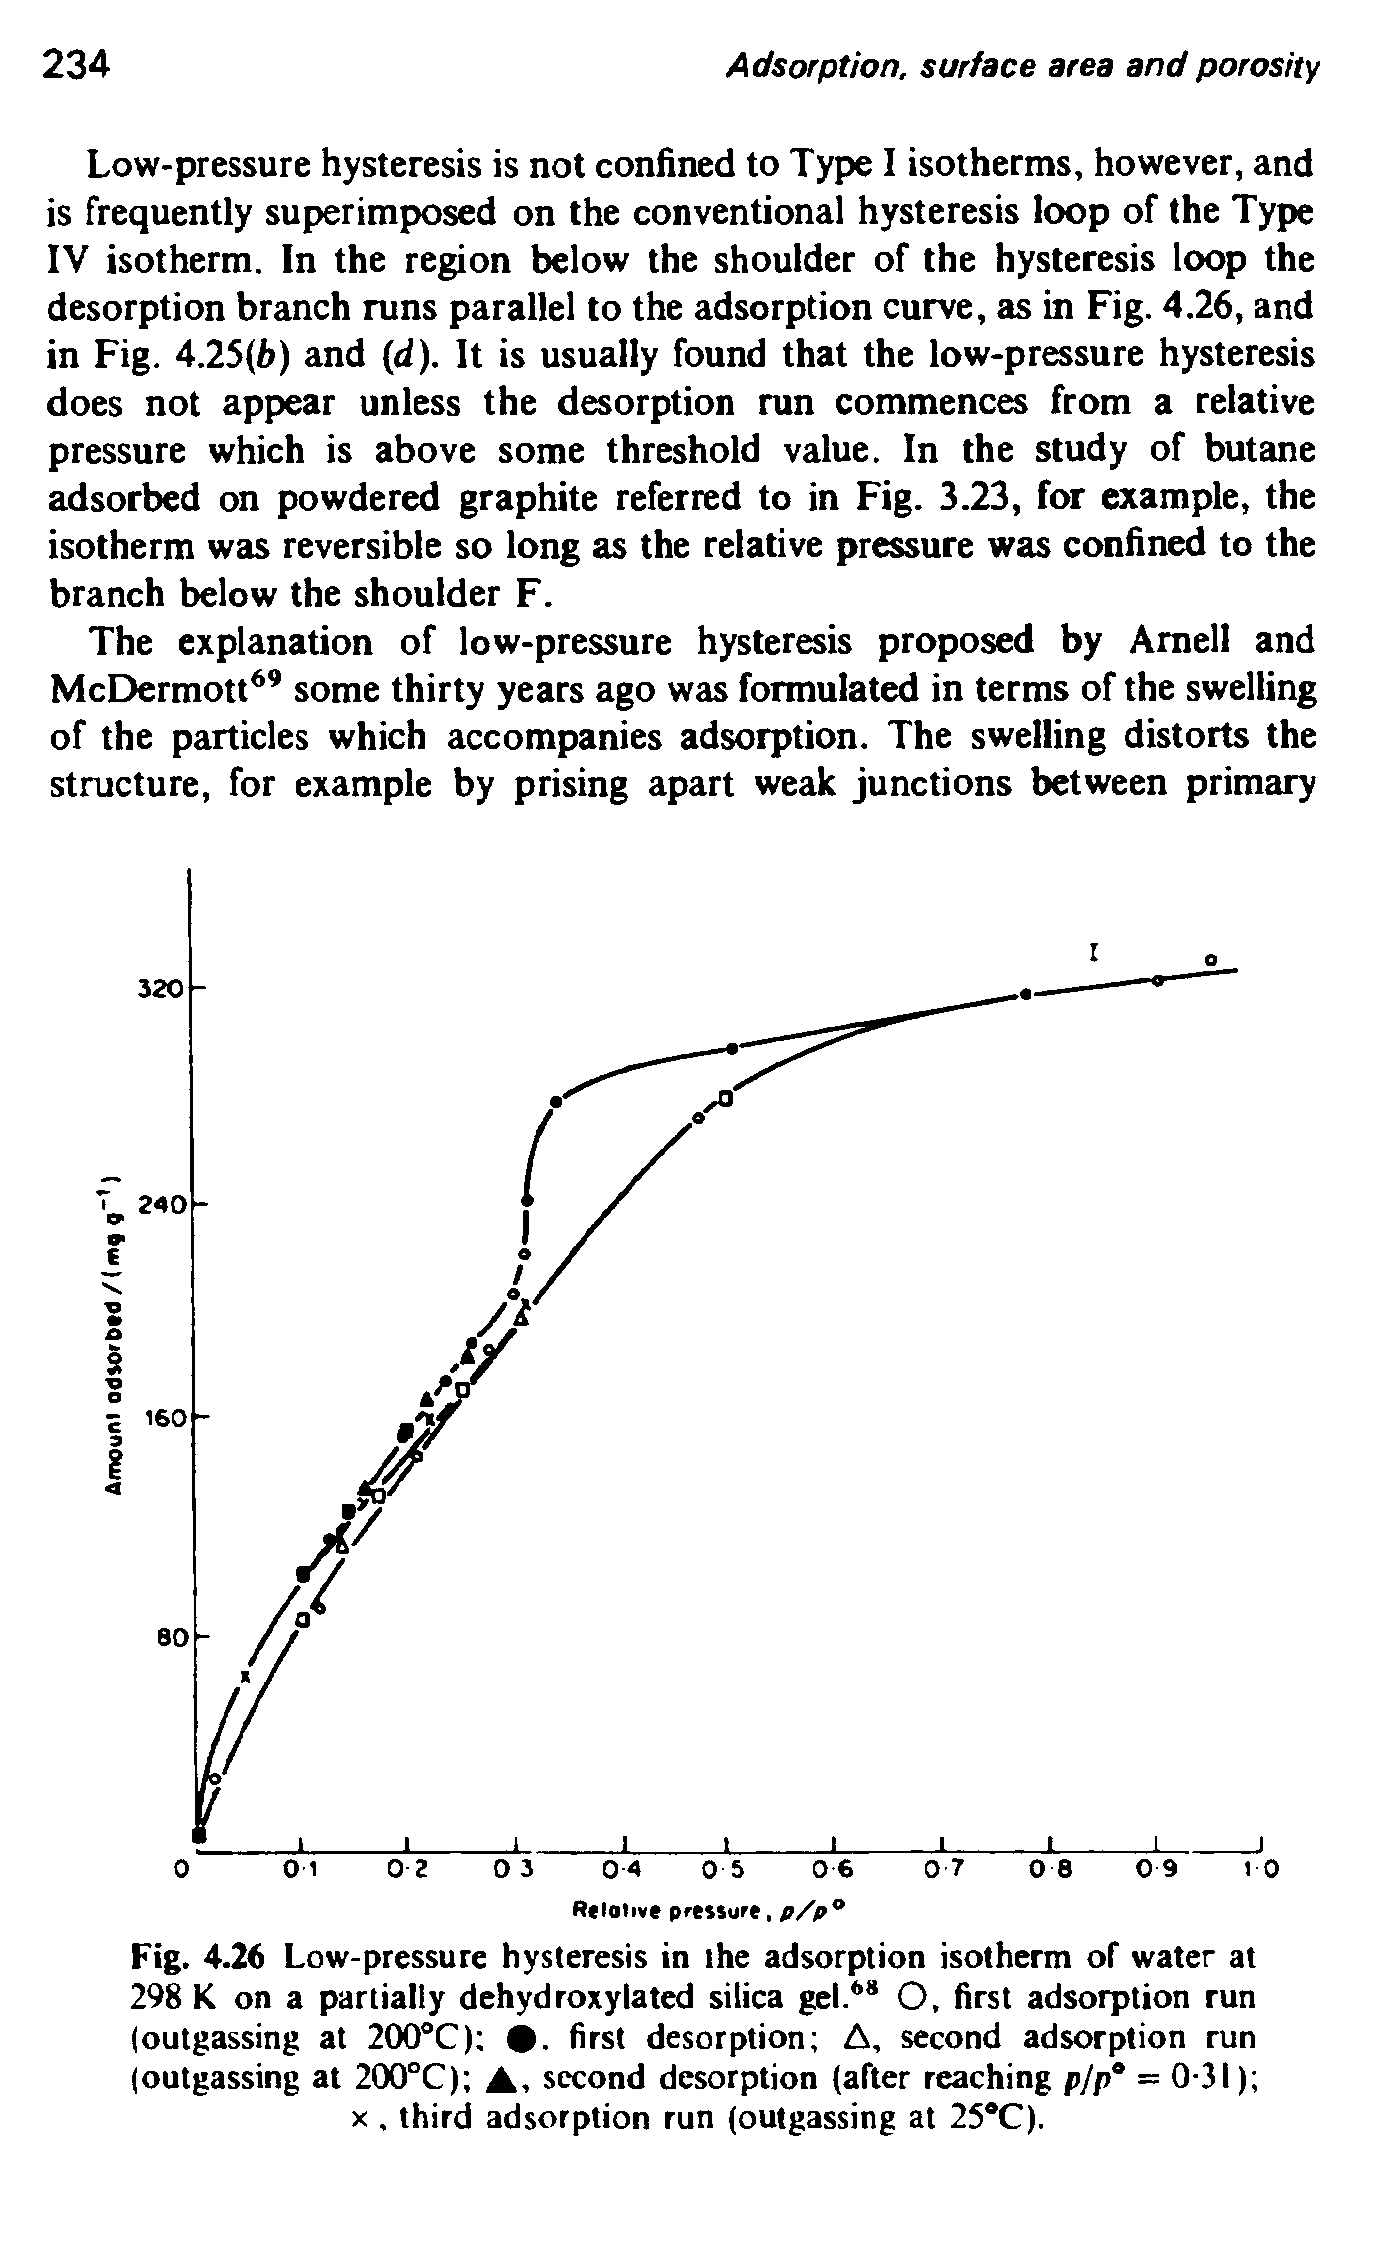 Fig. 4.26 Low-pressure hysteresis in the adsorption isotherm of water at 298 K on a partially dehydroxy la ted silica gel. O, first adsorption run (outgassing at 200°C) . first desorption A, second adsorption run (outgassing at 200°C) A. second desorption (after reaching p/p = 0-31) X, third adsorption run (outgassing at 25 C).